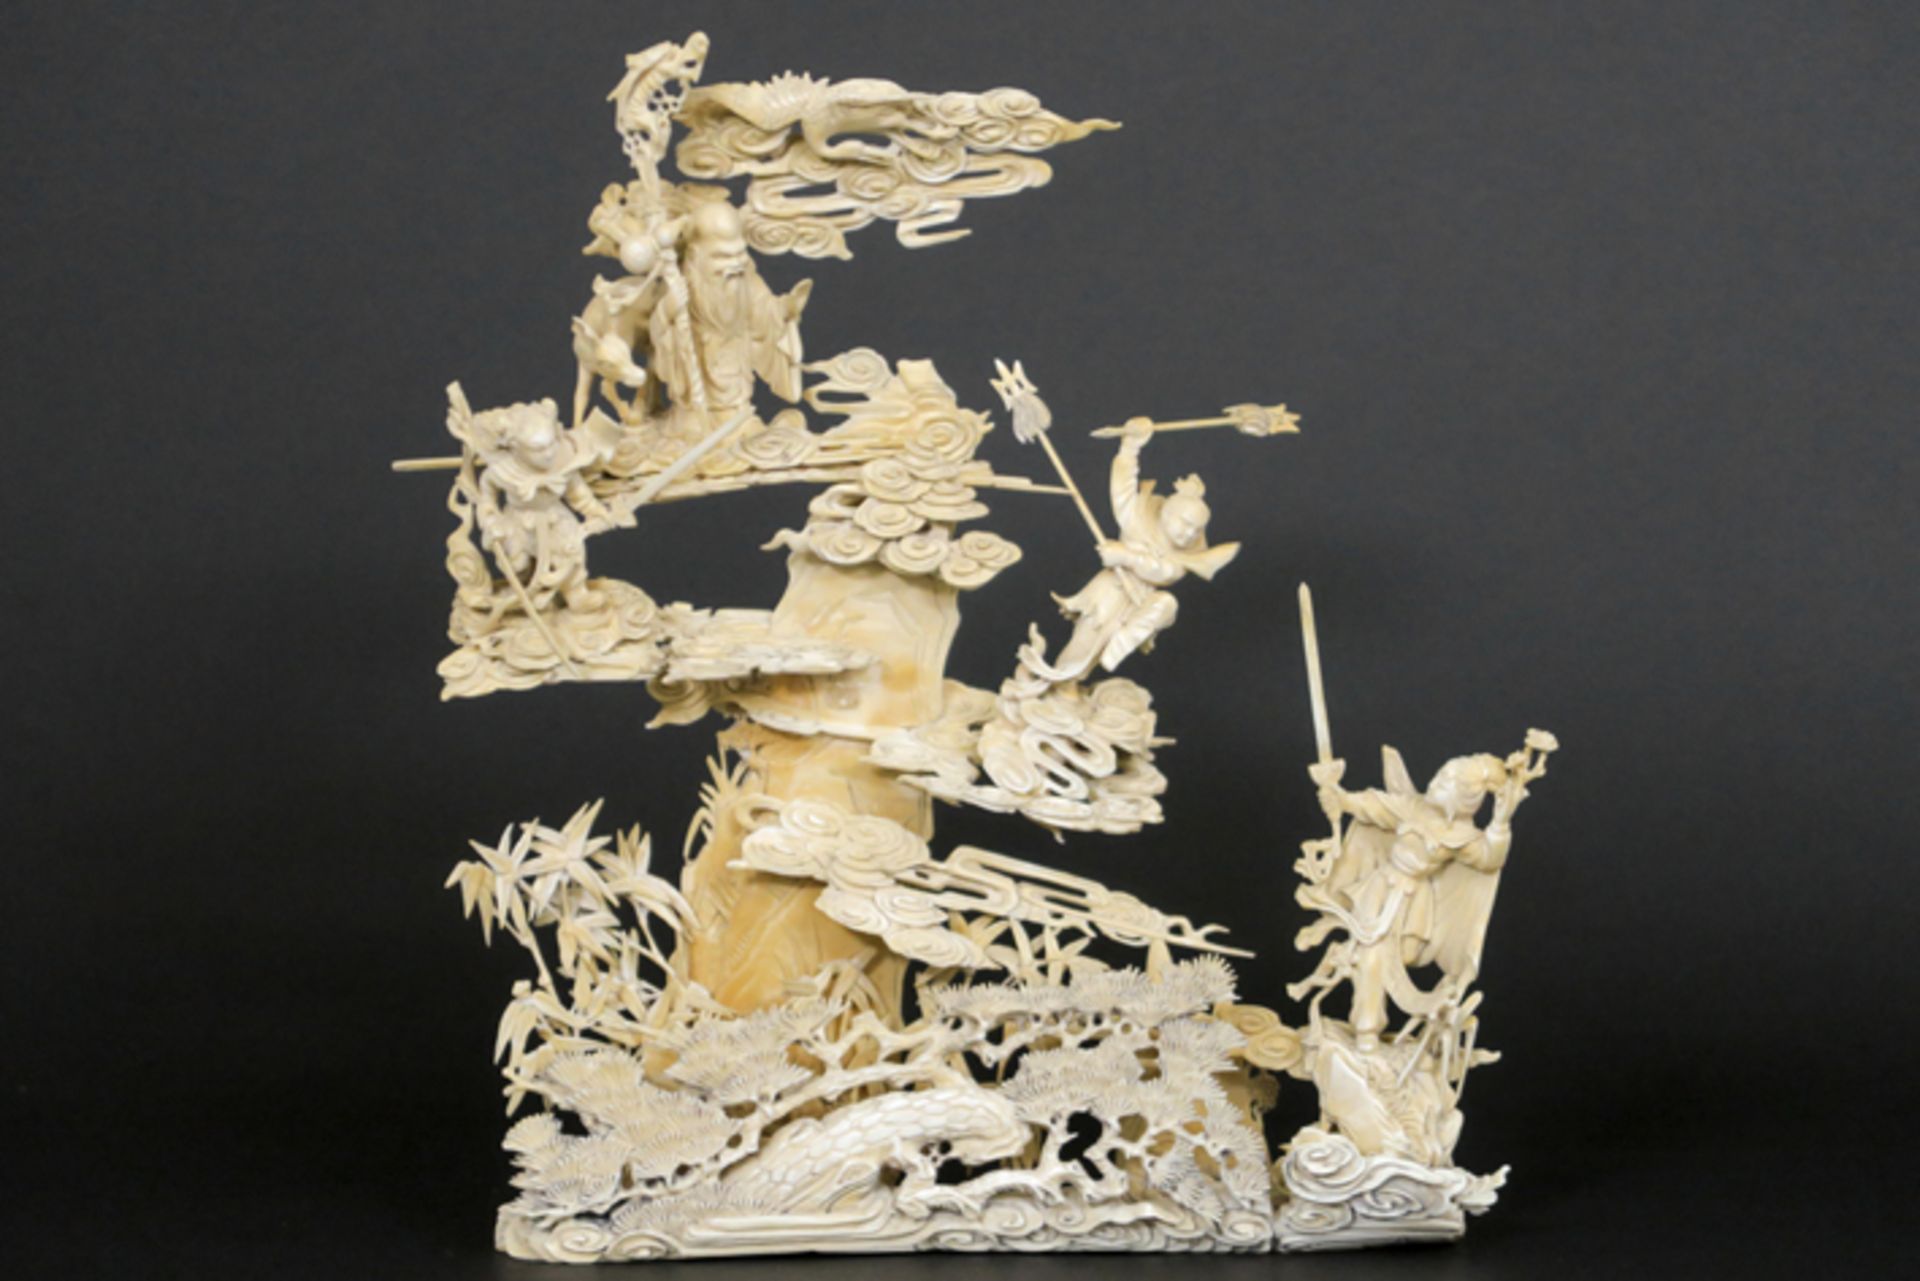 19th Cent. Chinese "Sage with three figures in the clouds" sculpture in ivory - - [...]